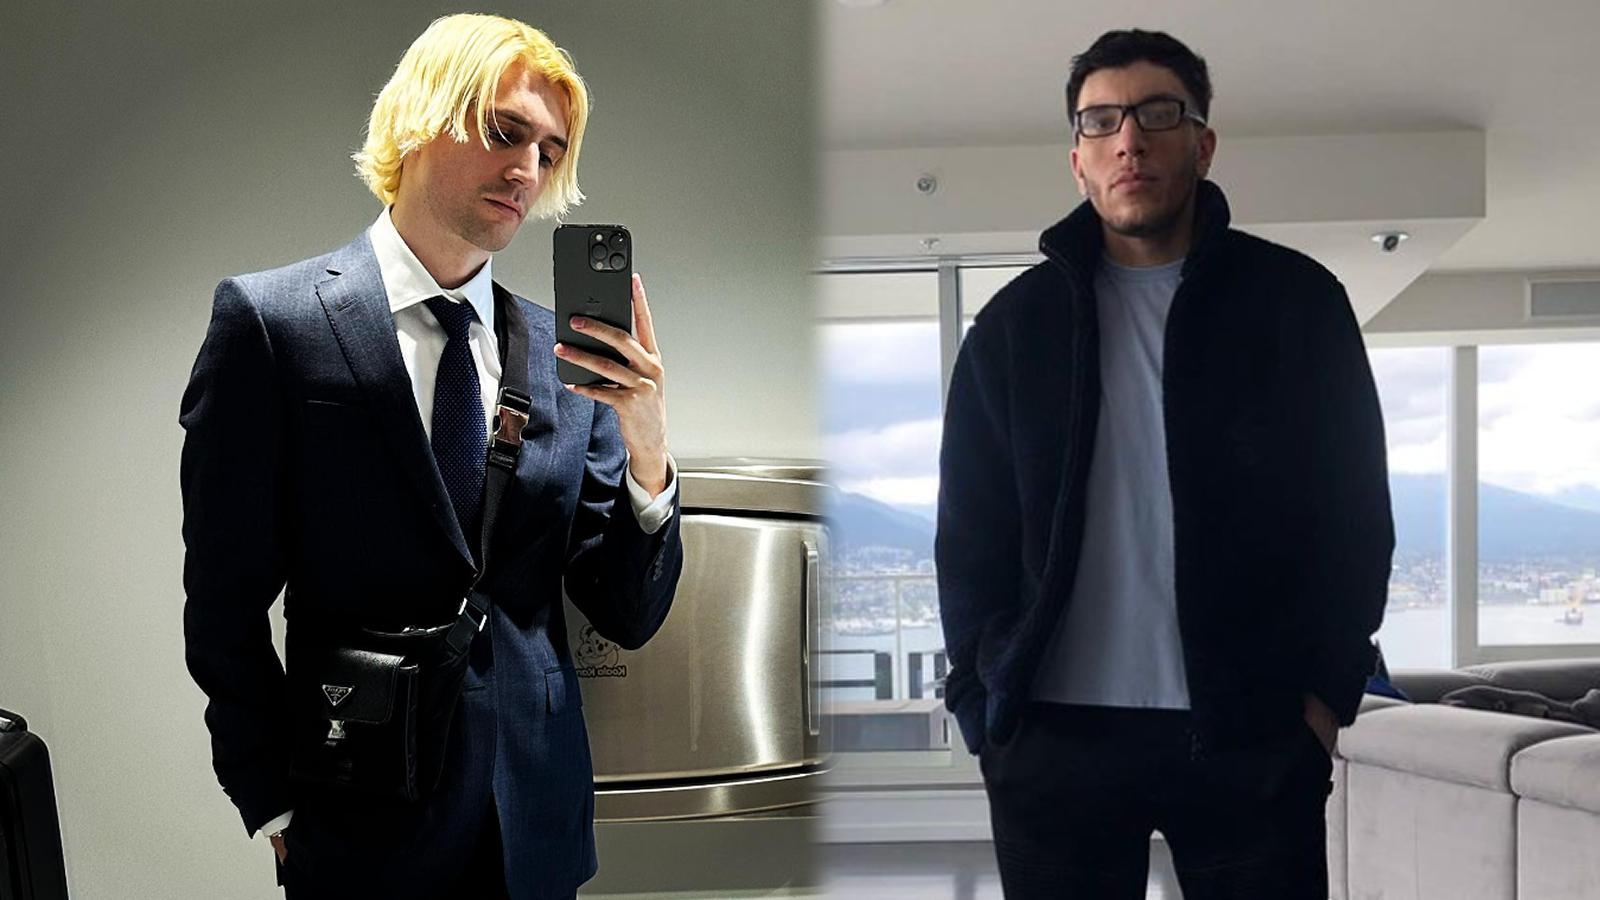 A selfie of xQc on the left, TrainwrecksTV on the right